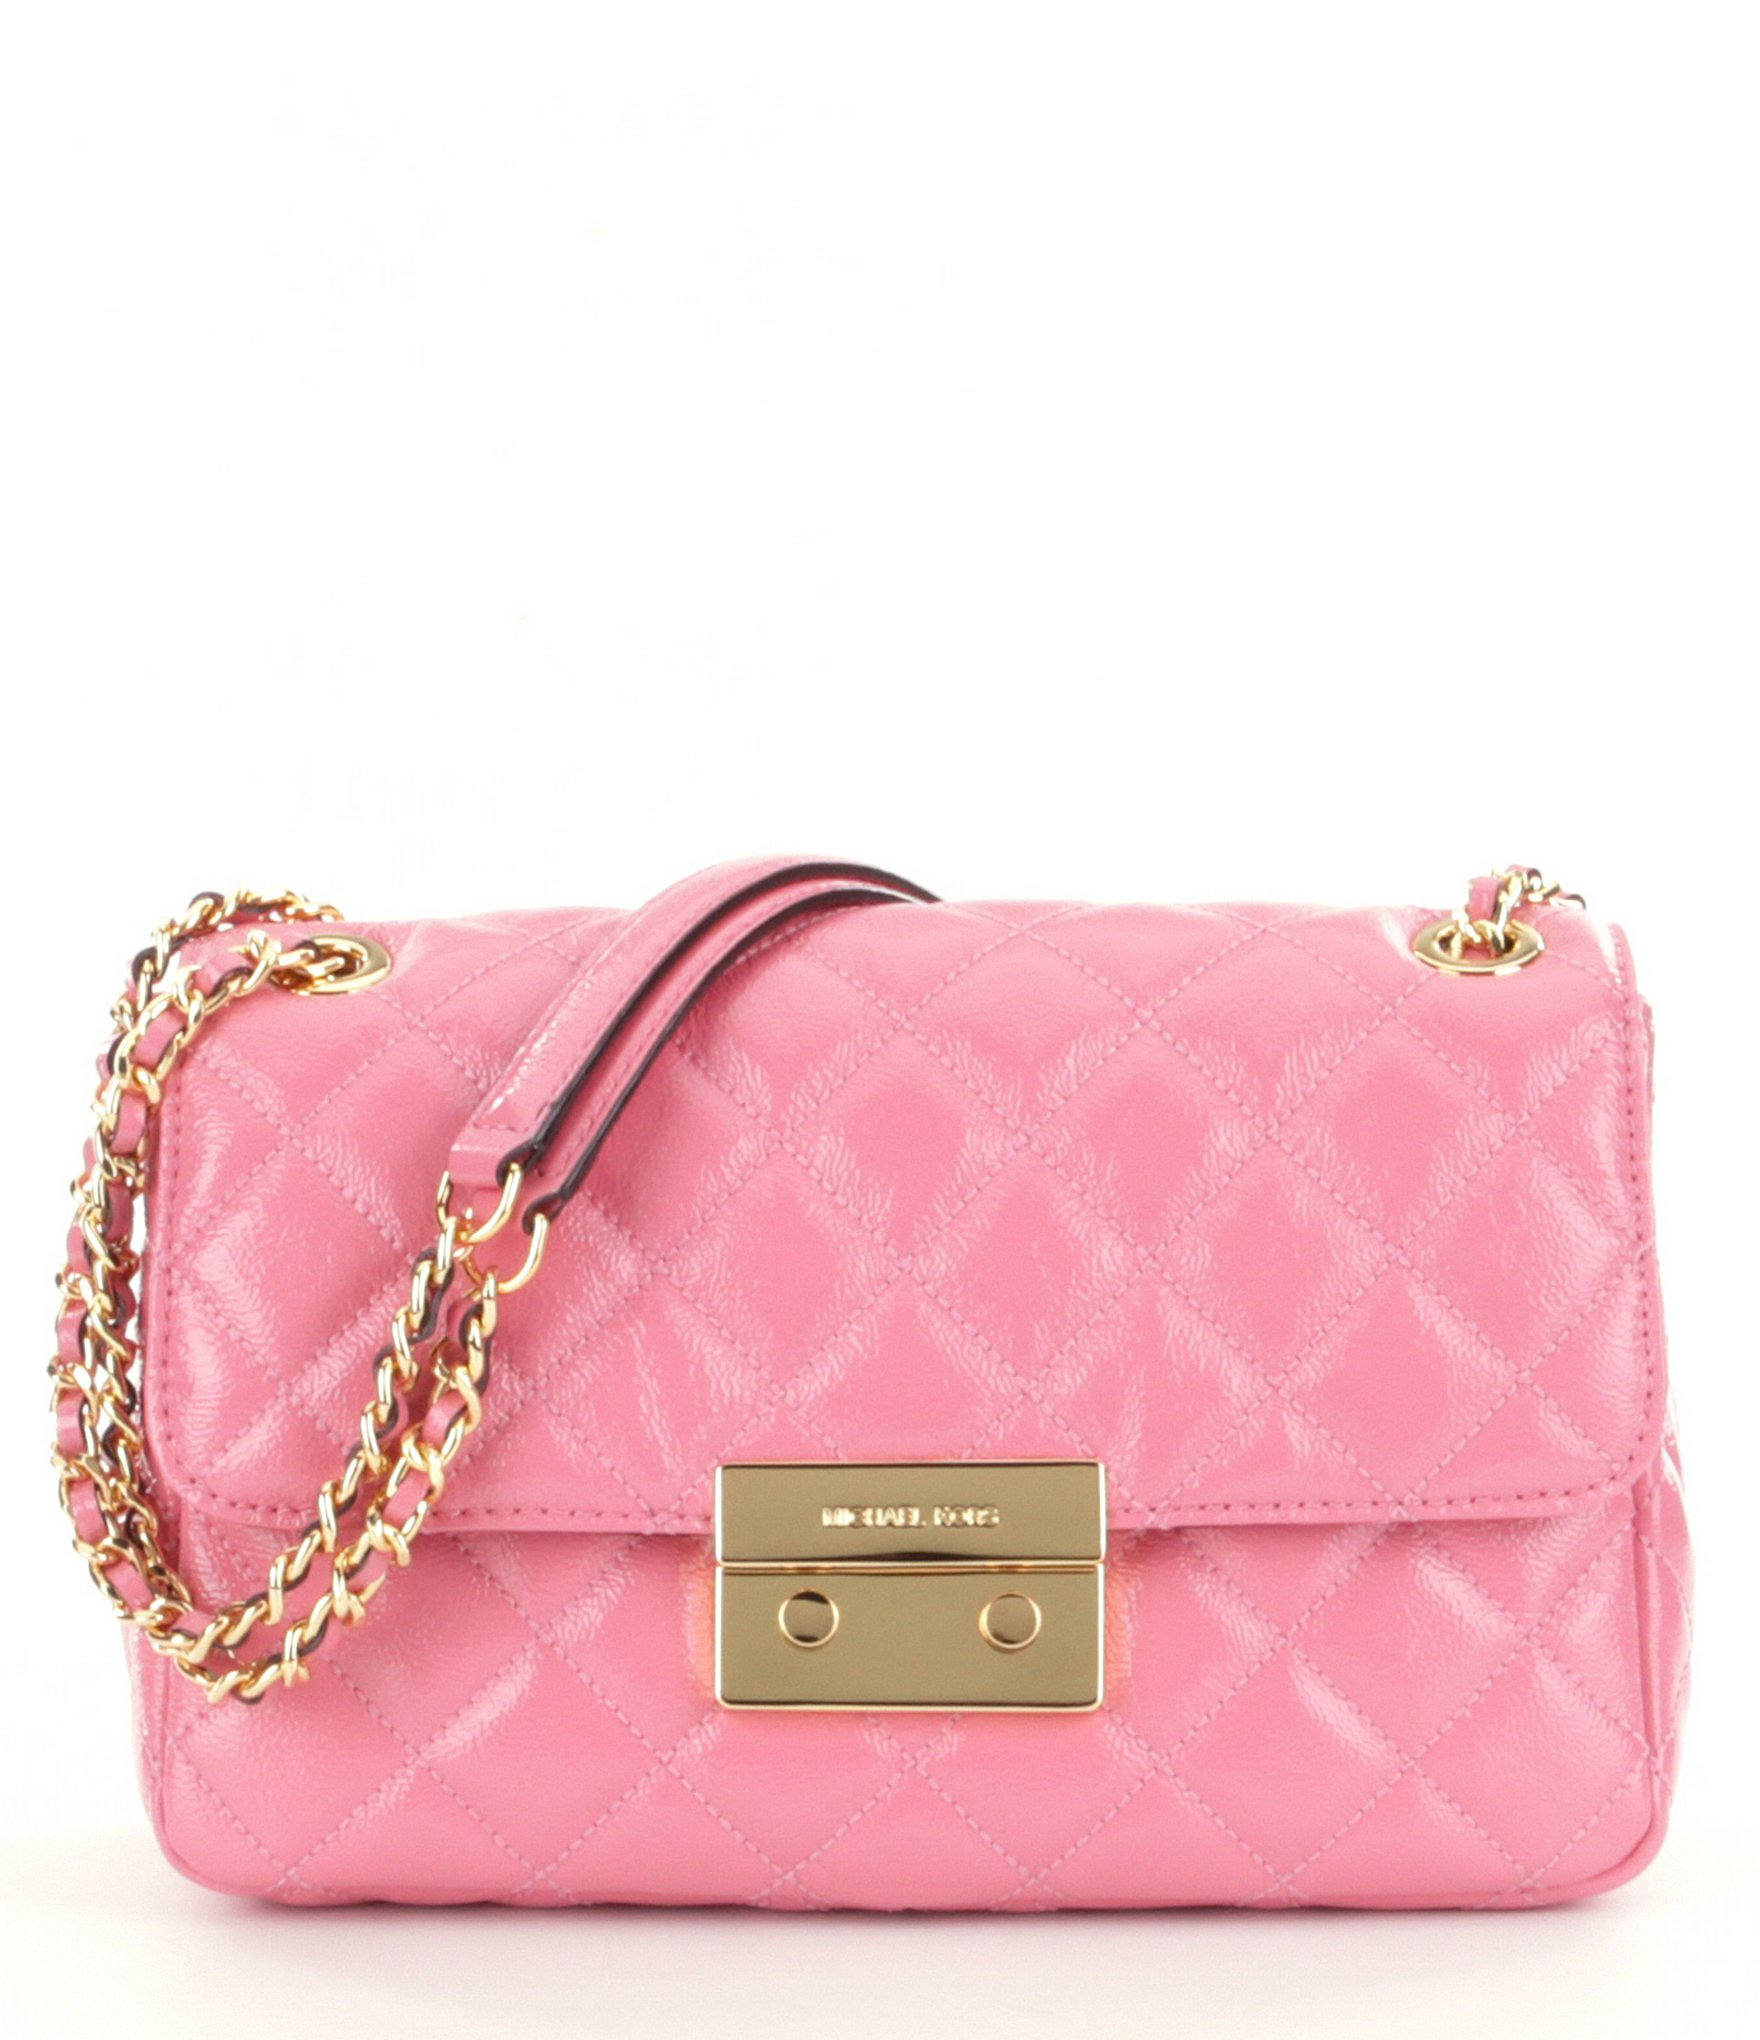 MICHAEL Michael Kors Sloan Quilted Patent Leather Chain-strap Large Shoulder Bag in Pink - Lyst